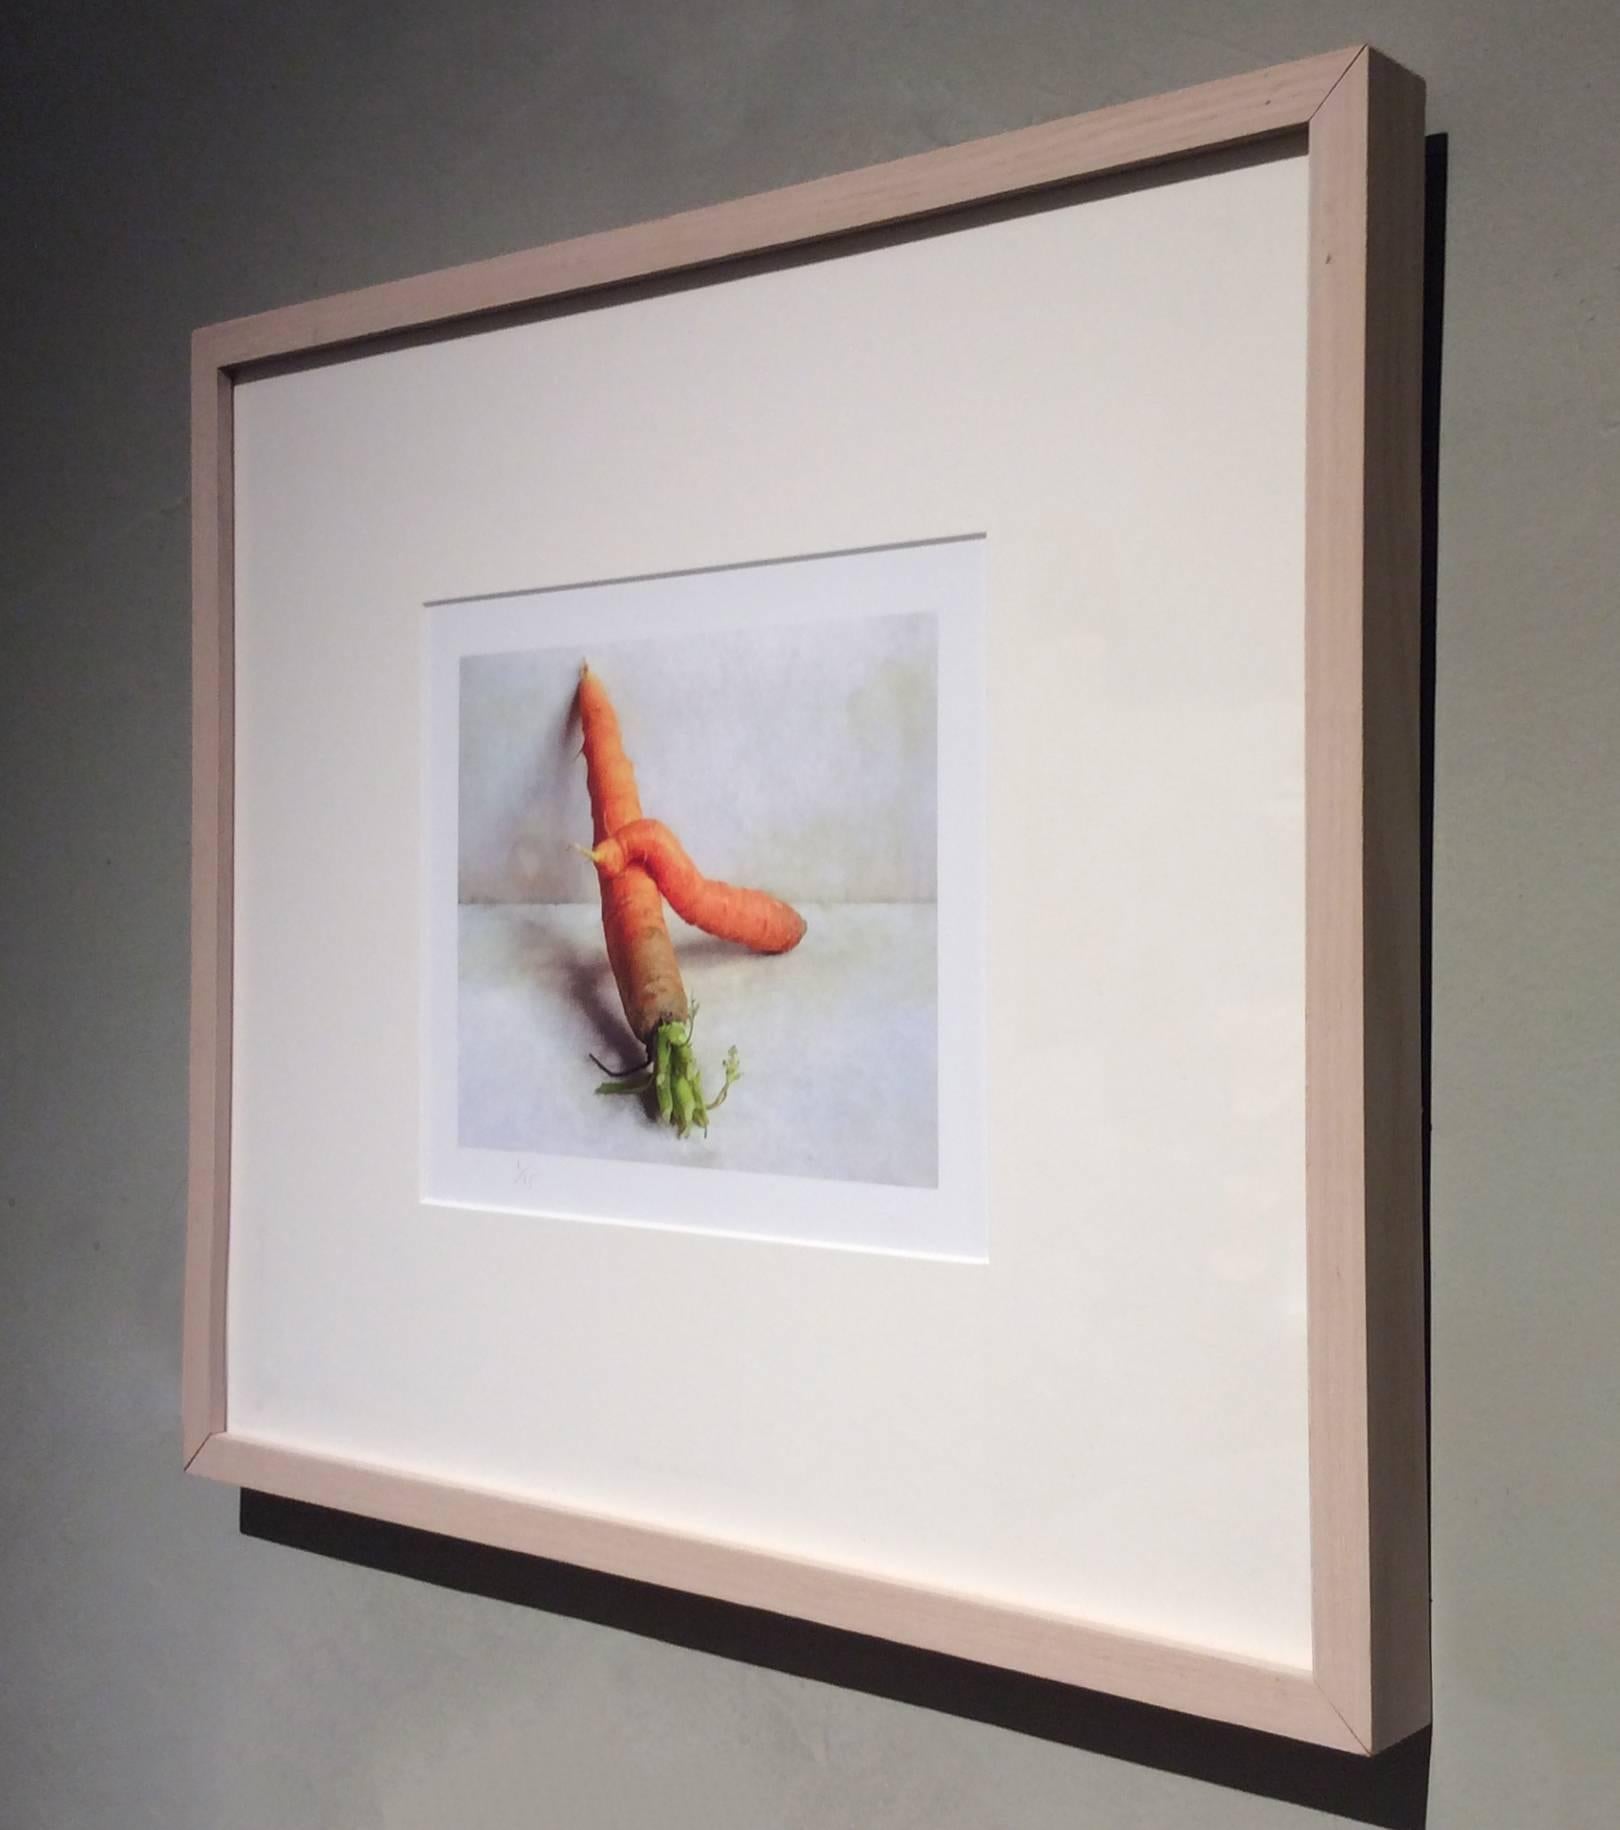 archival pigment print
16 x 19 in simple wood frame with white mat

This archival pigment print of two oranges resting on a textured white surface was created by photographer David Halliday. As with all of his culinary-themed still lifes, Halliday